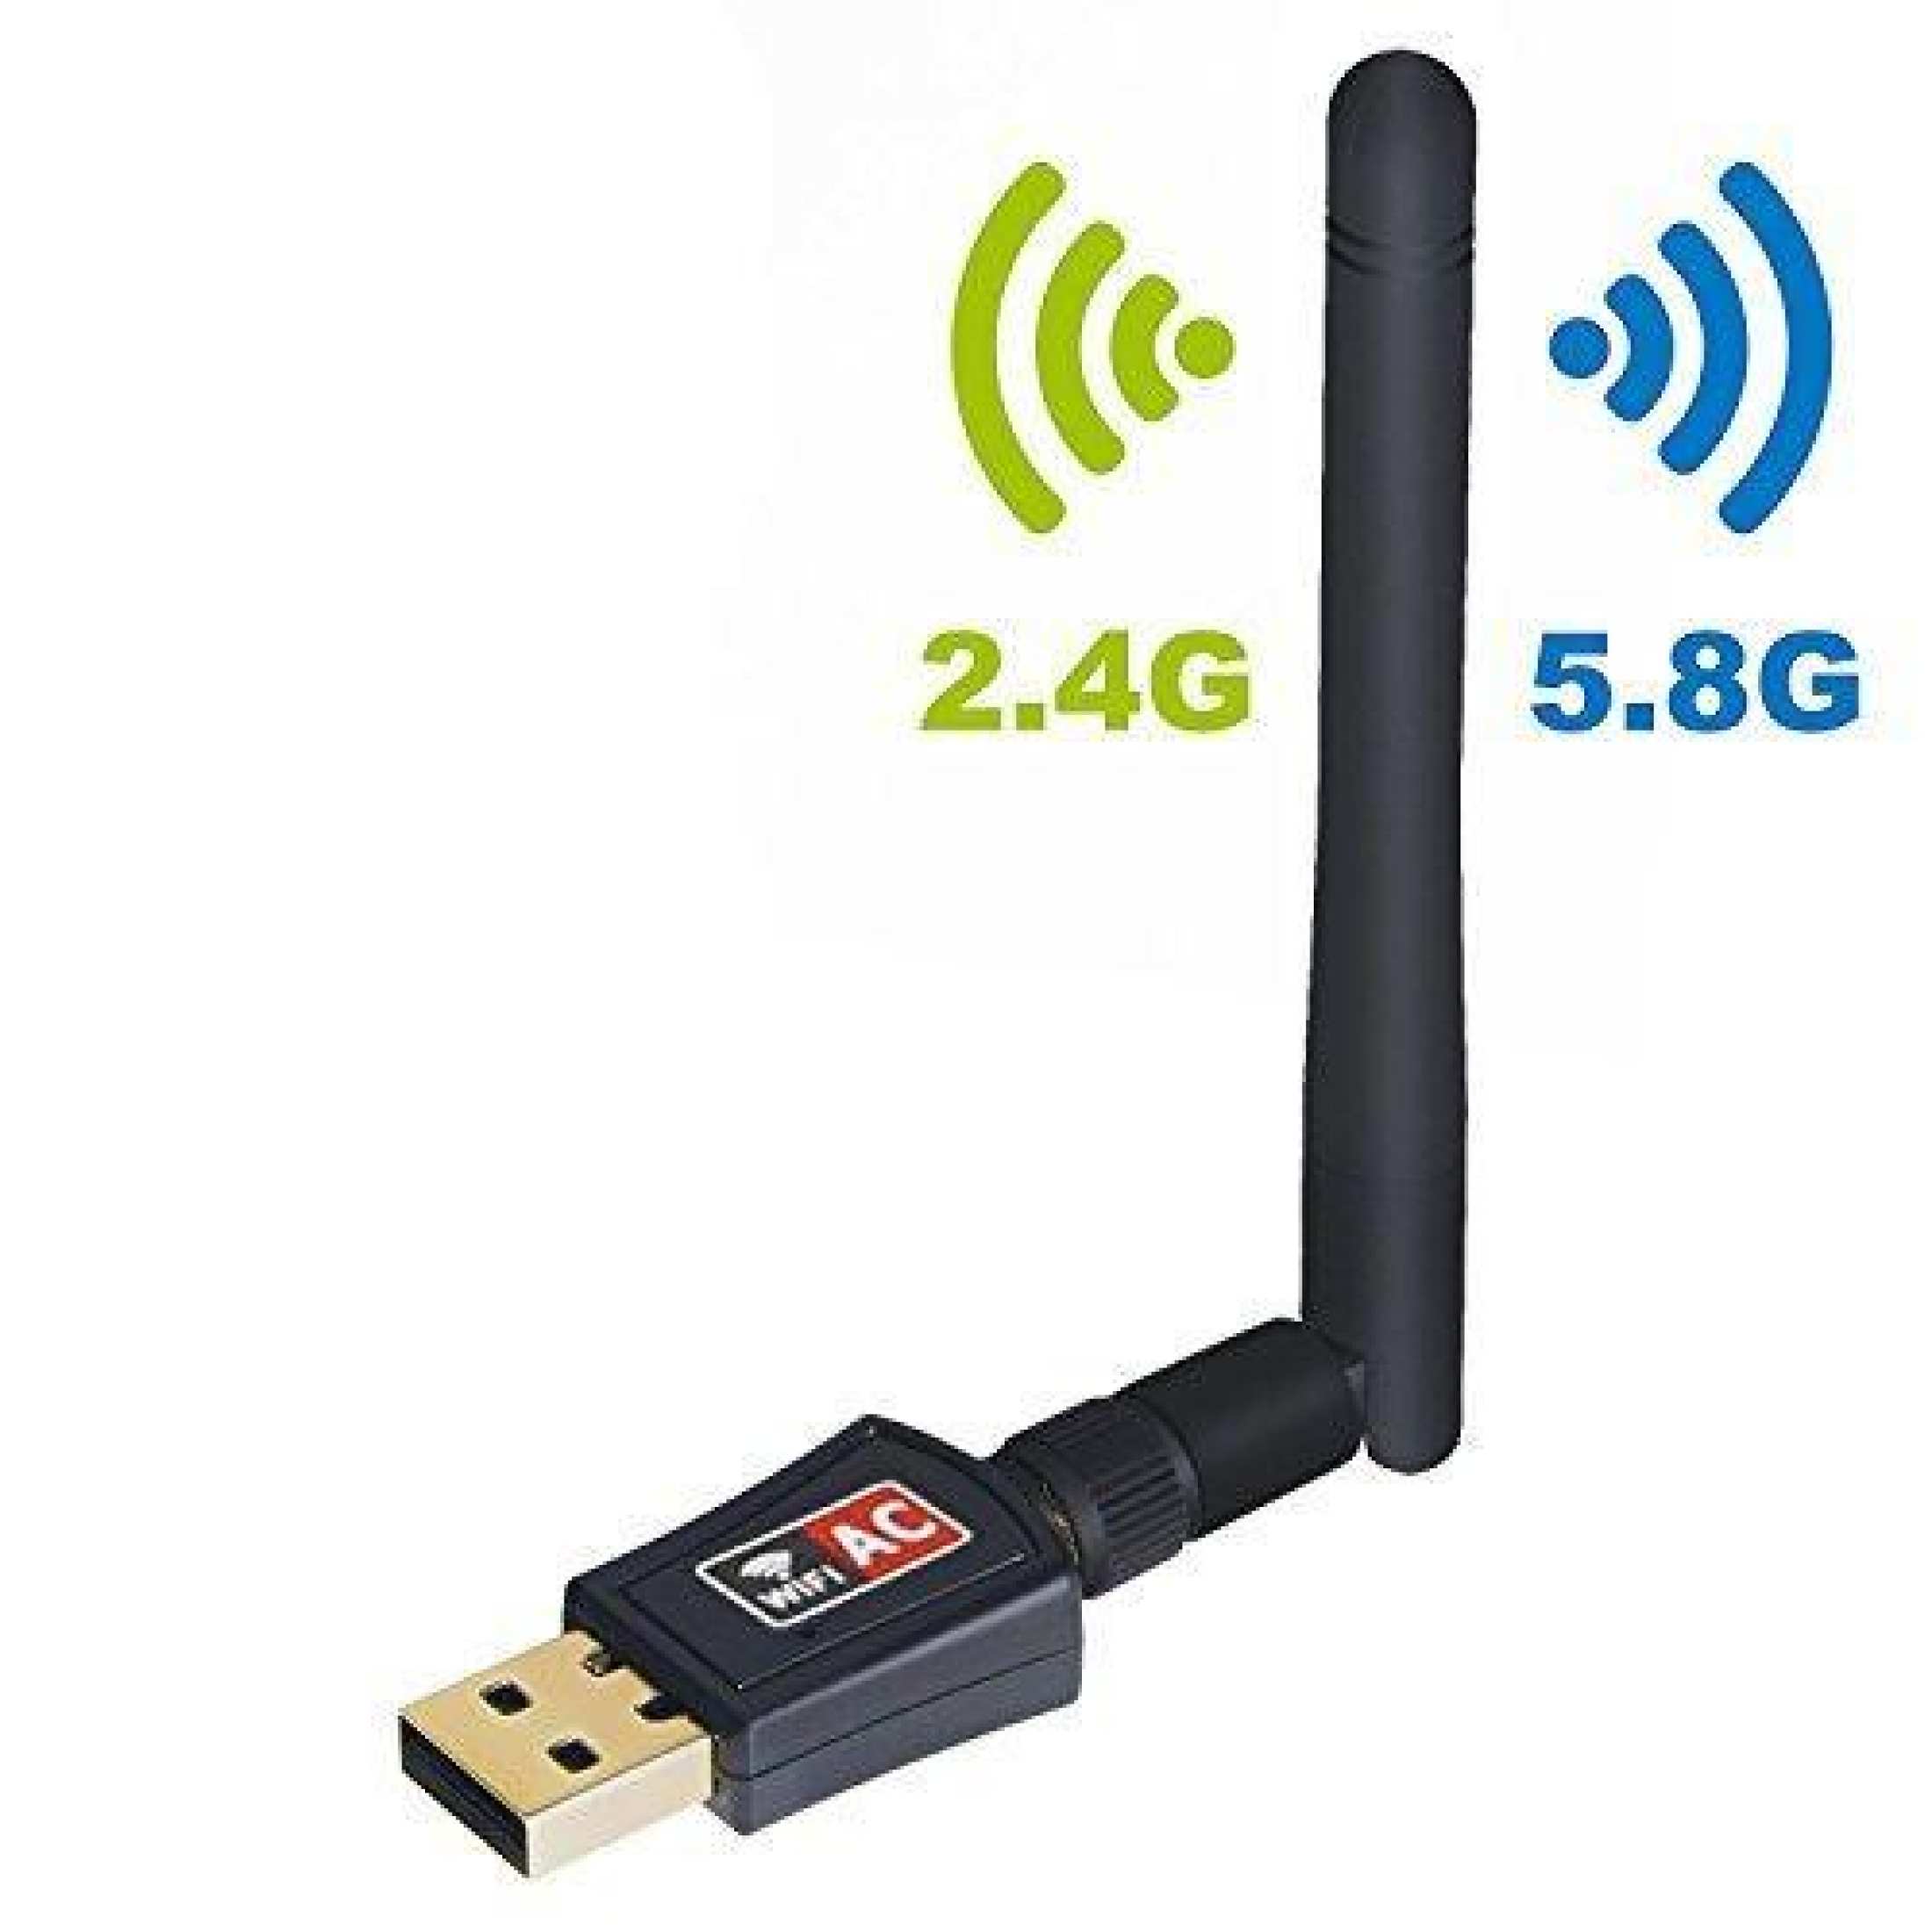 USB Wifi Receiver and 300Mbps PC -